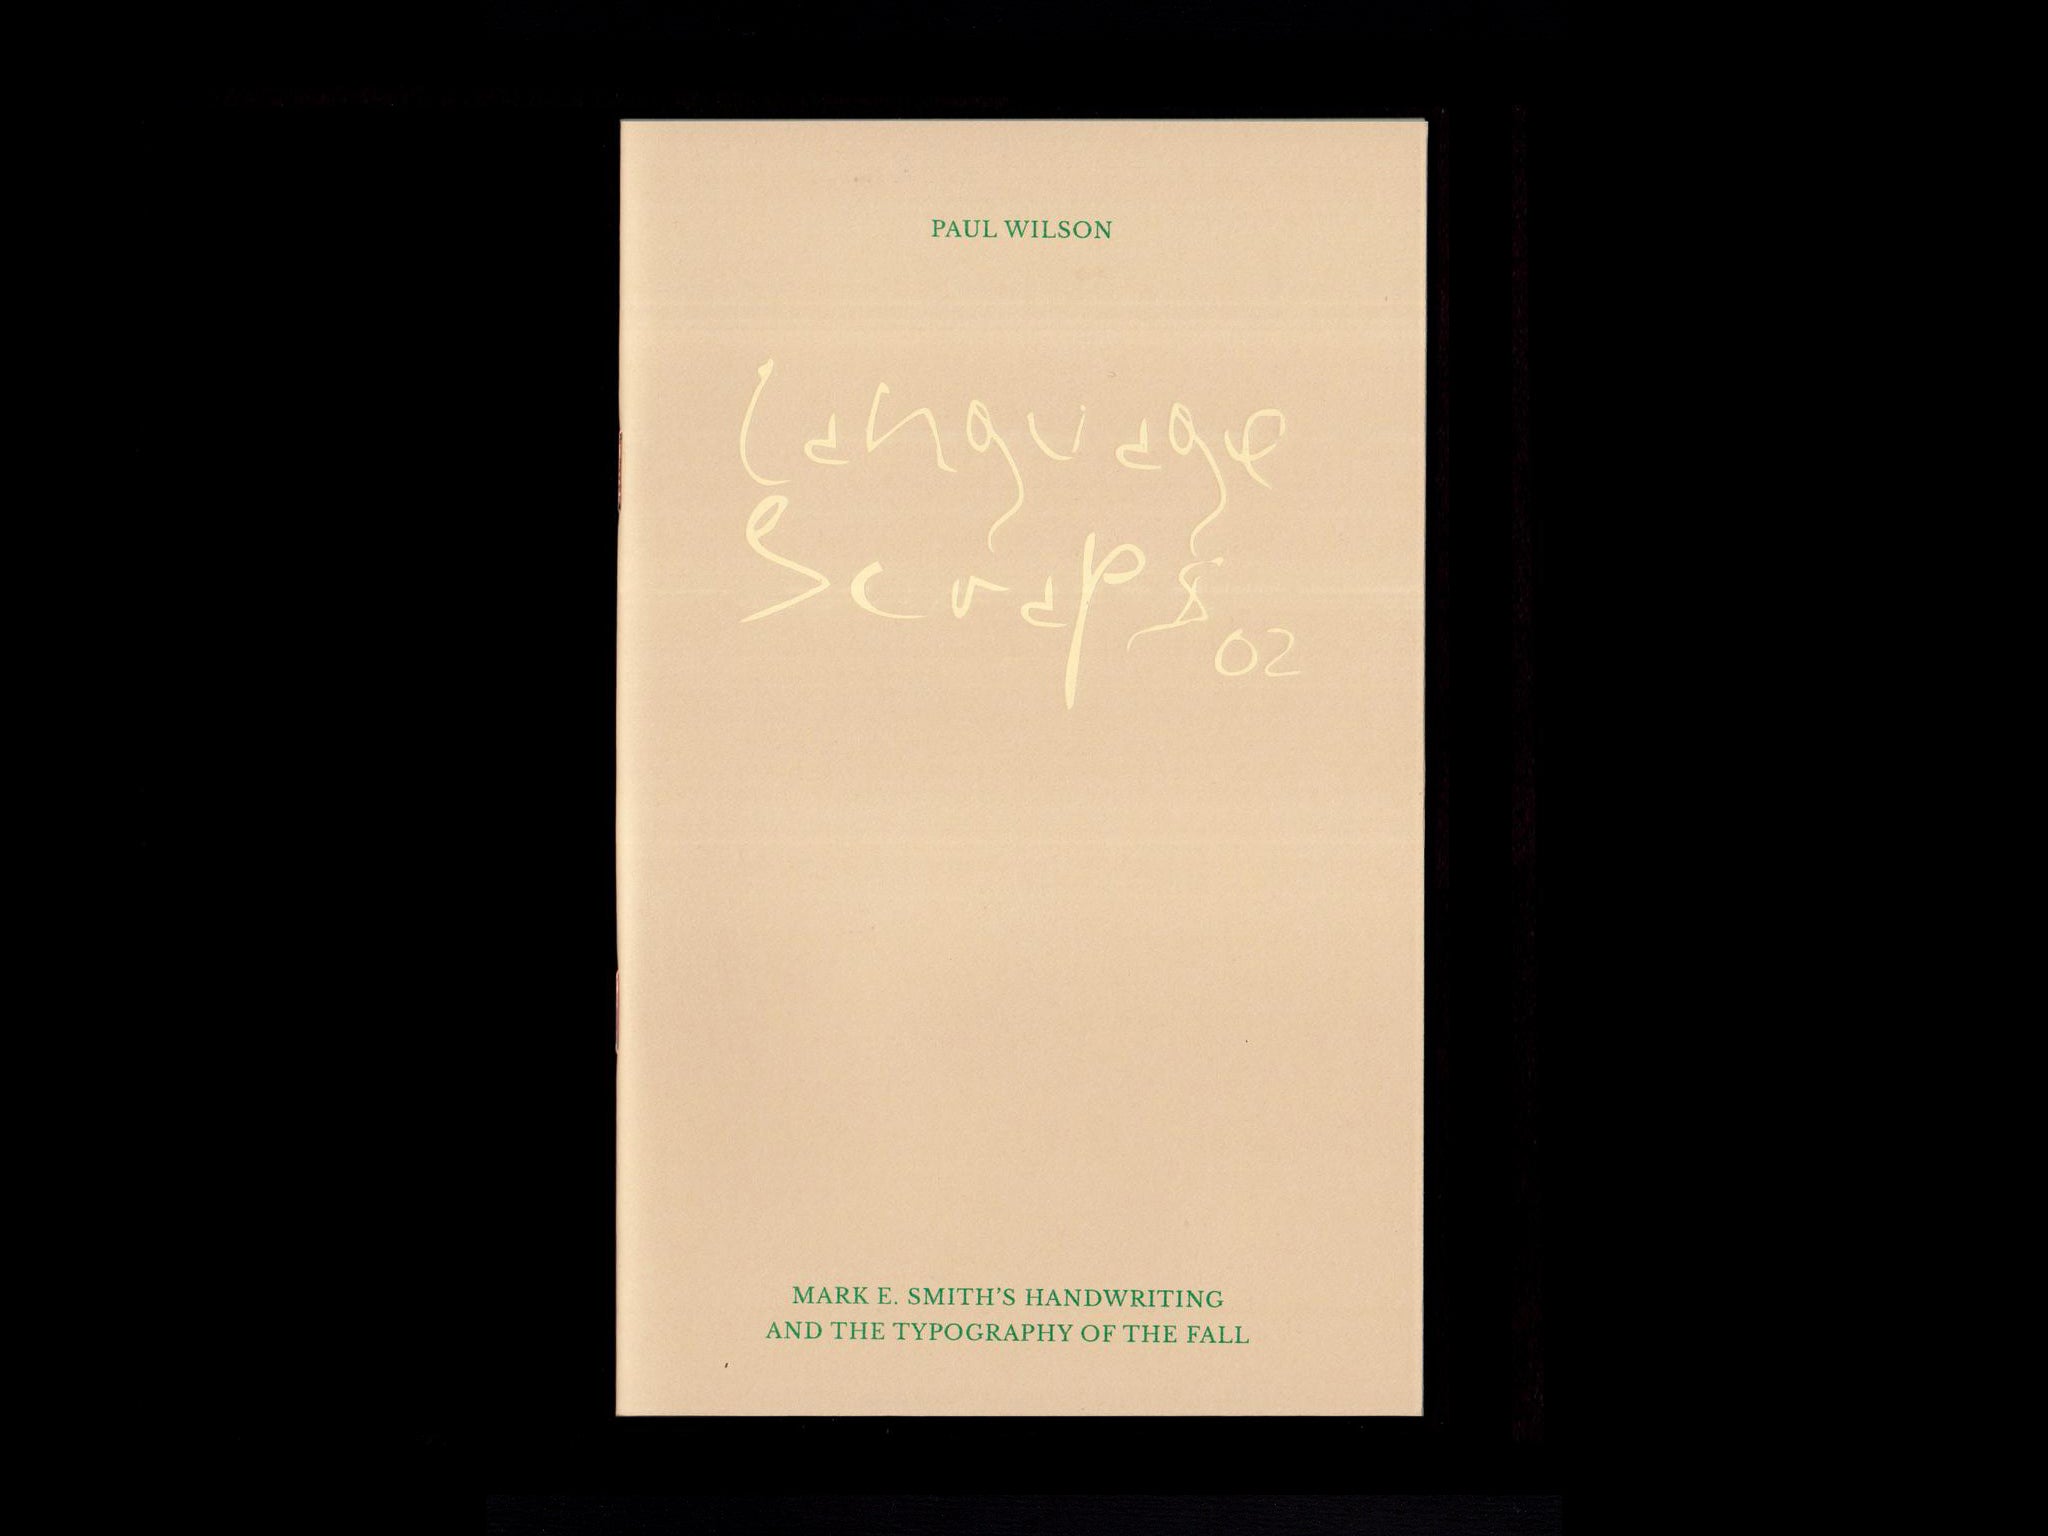 LANGUAGE SCRAPS 02: MARK E. SMITH’S HANDWRITING AND THE TYPOGRAPHY OF THE FALL by Paul Wilson